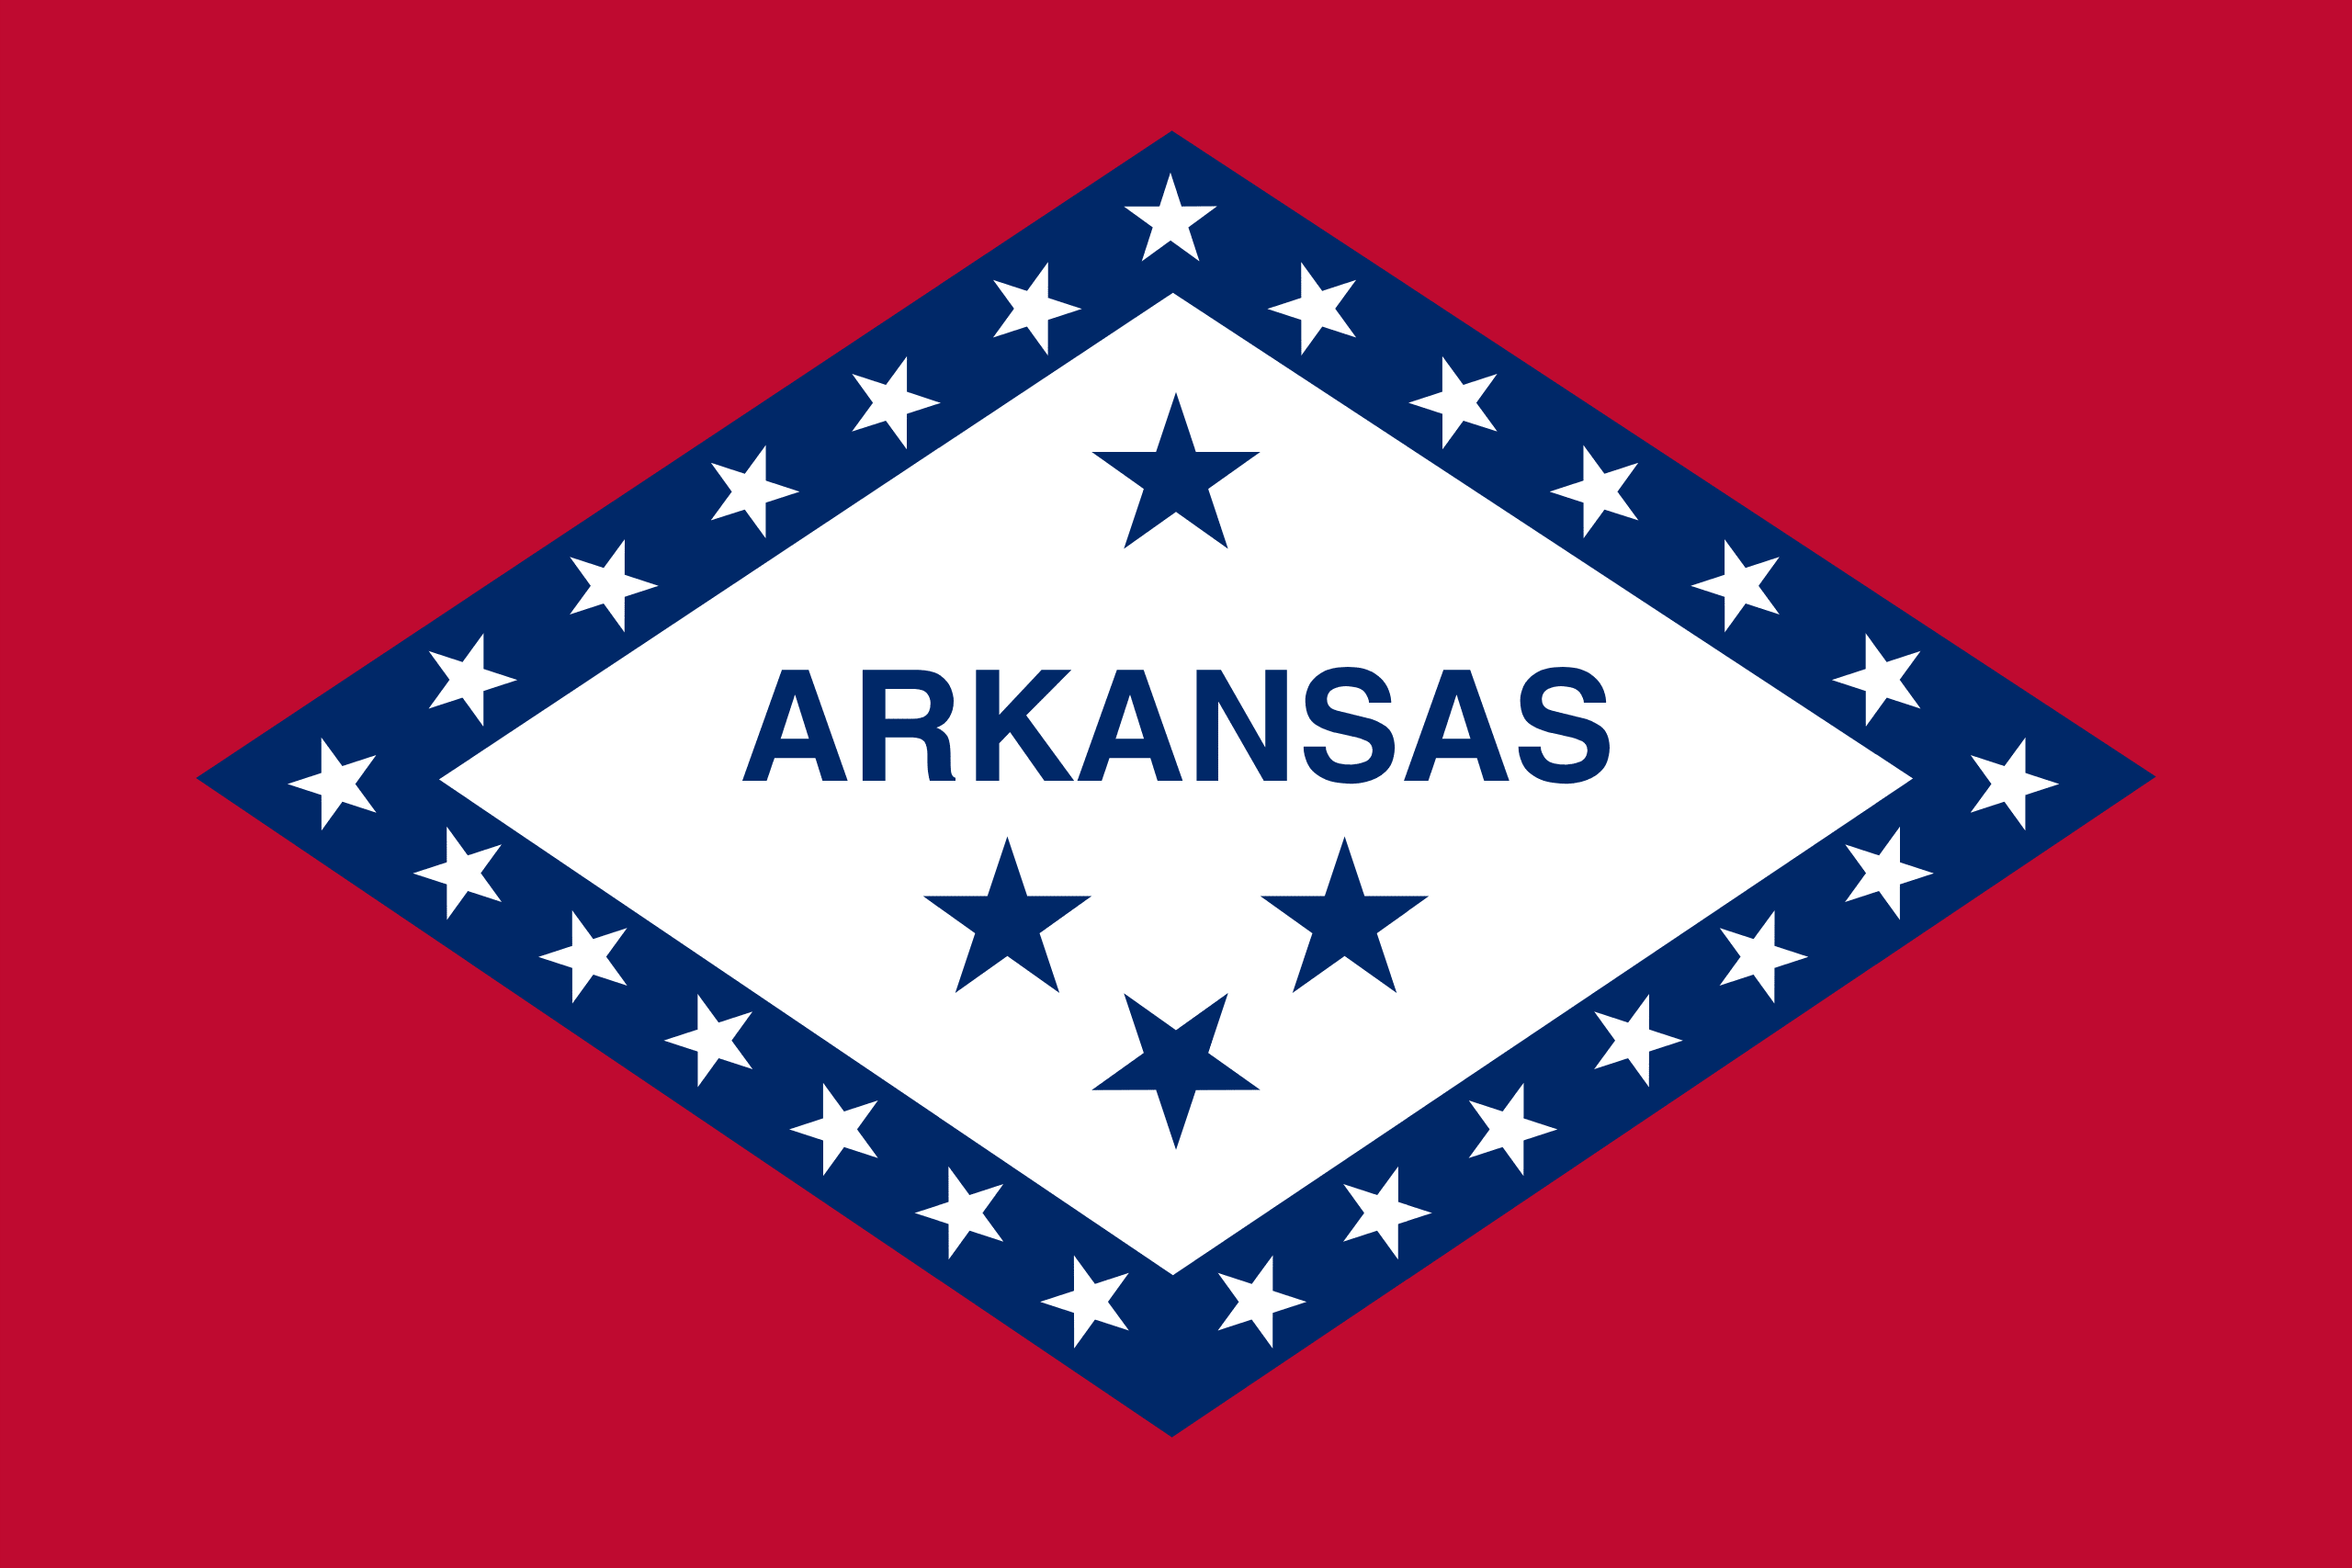 What is the capital of Arkansas?